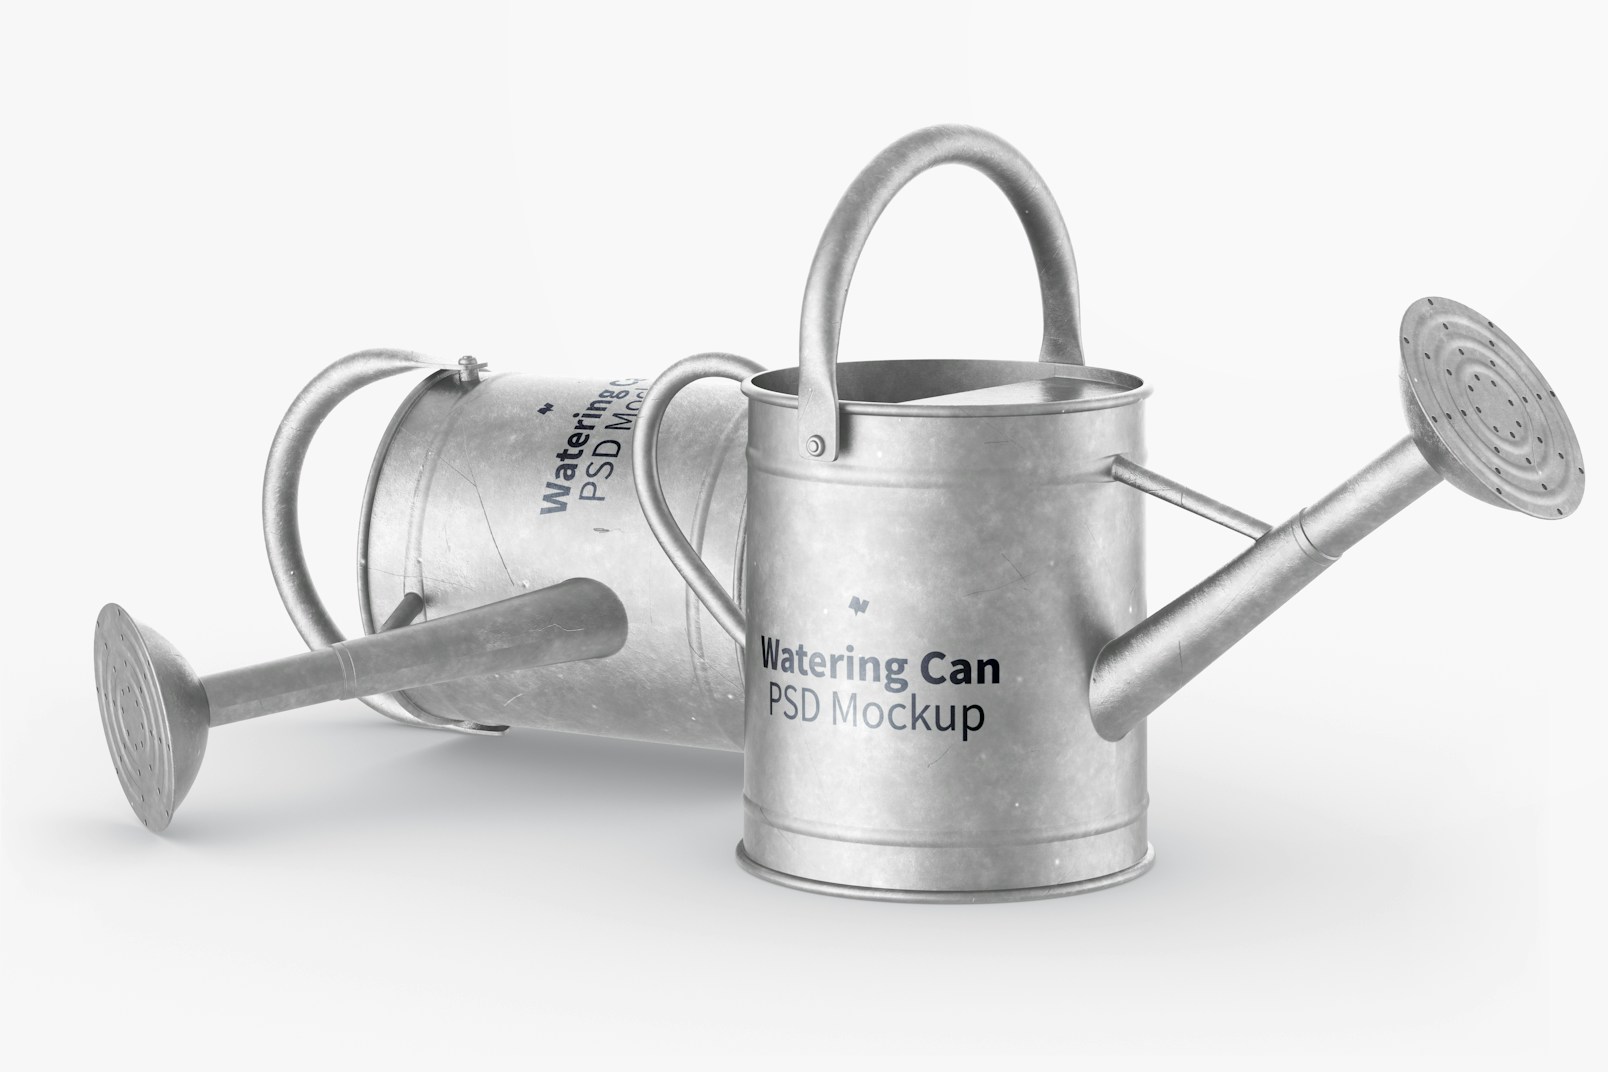 Watering Cans Mockup